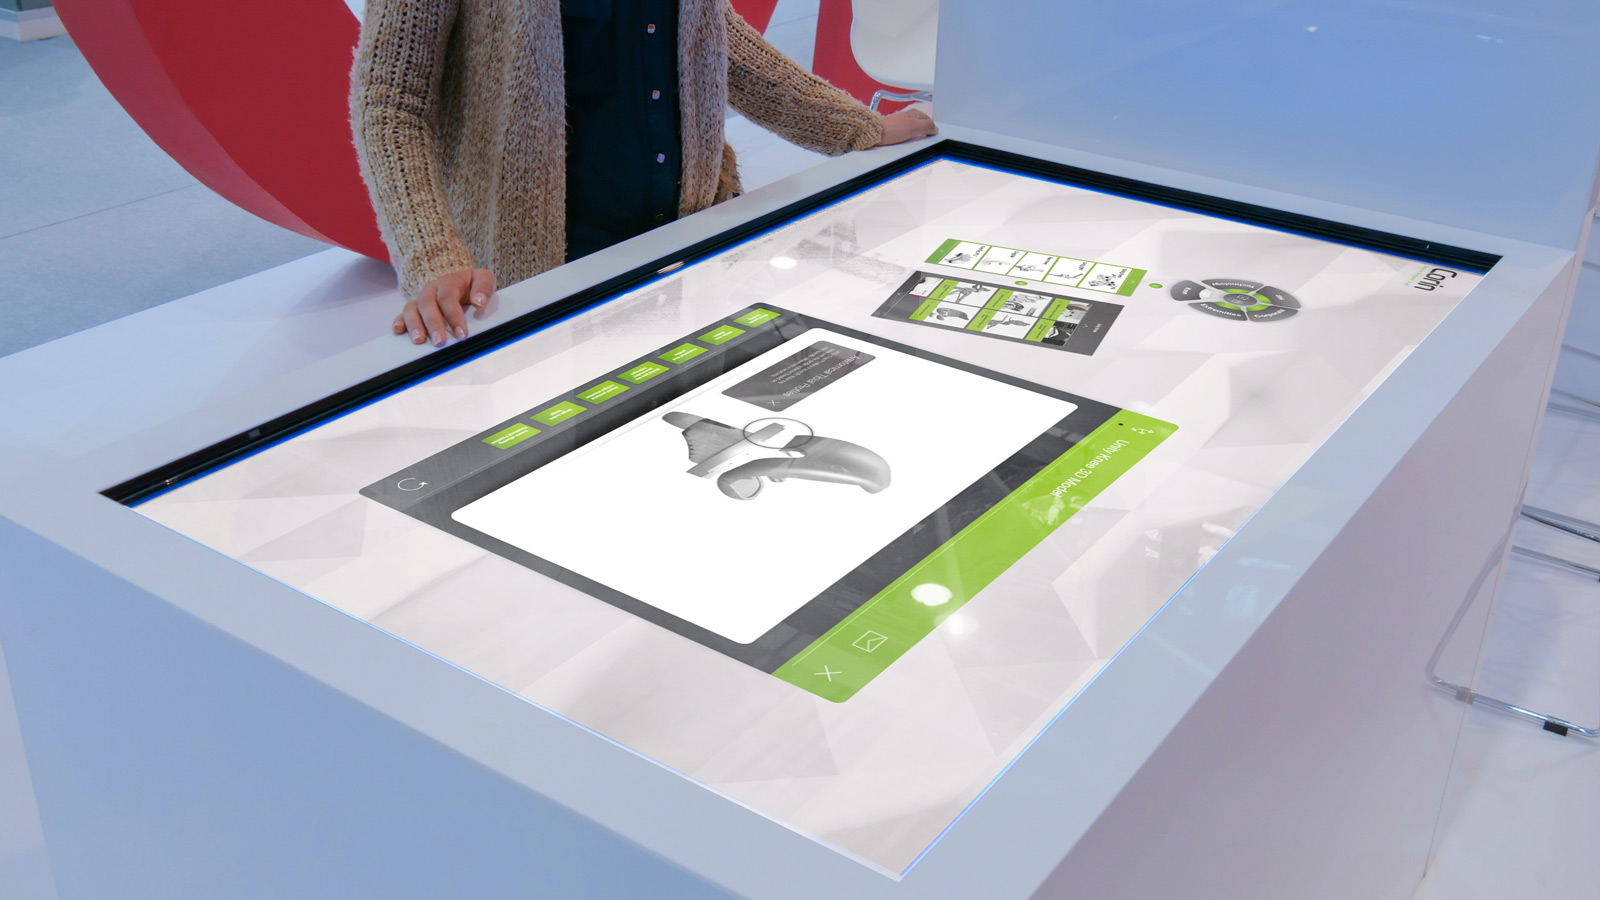 woman interacting with Corin interactive touchscreen software displayed on large white table